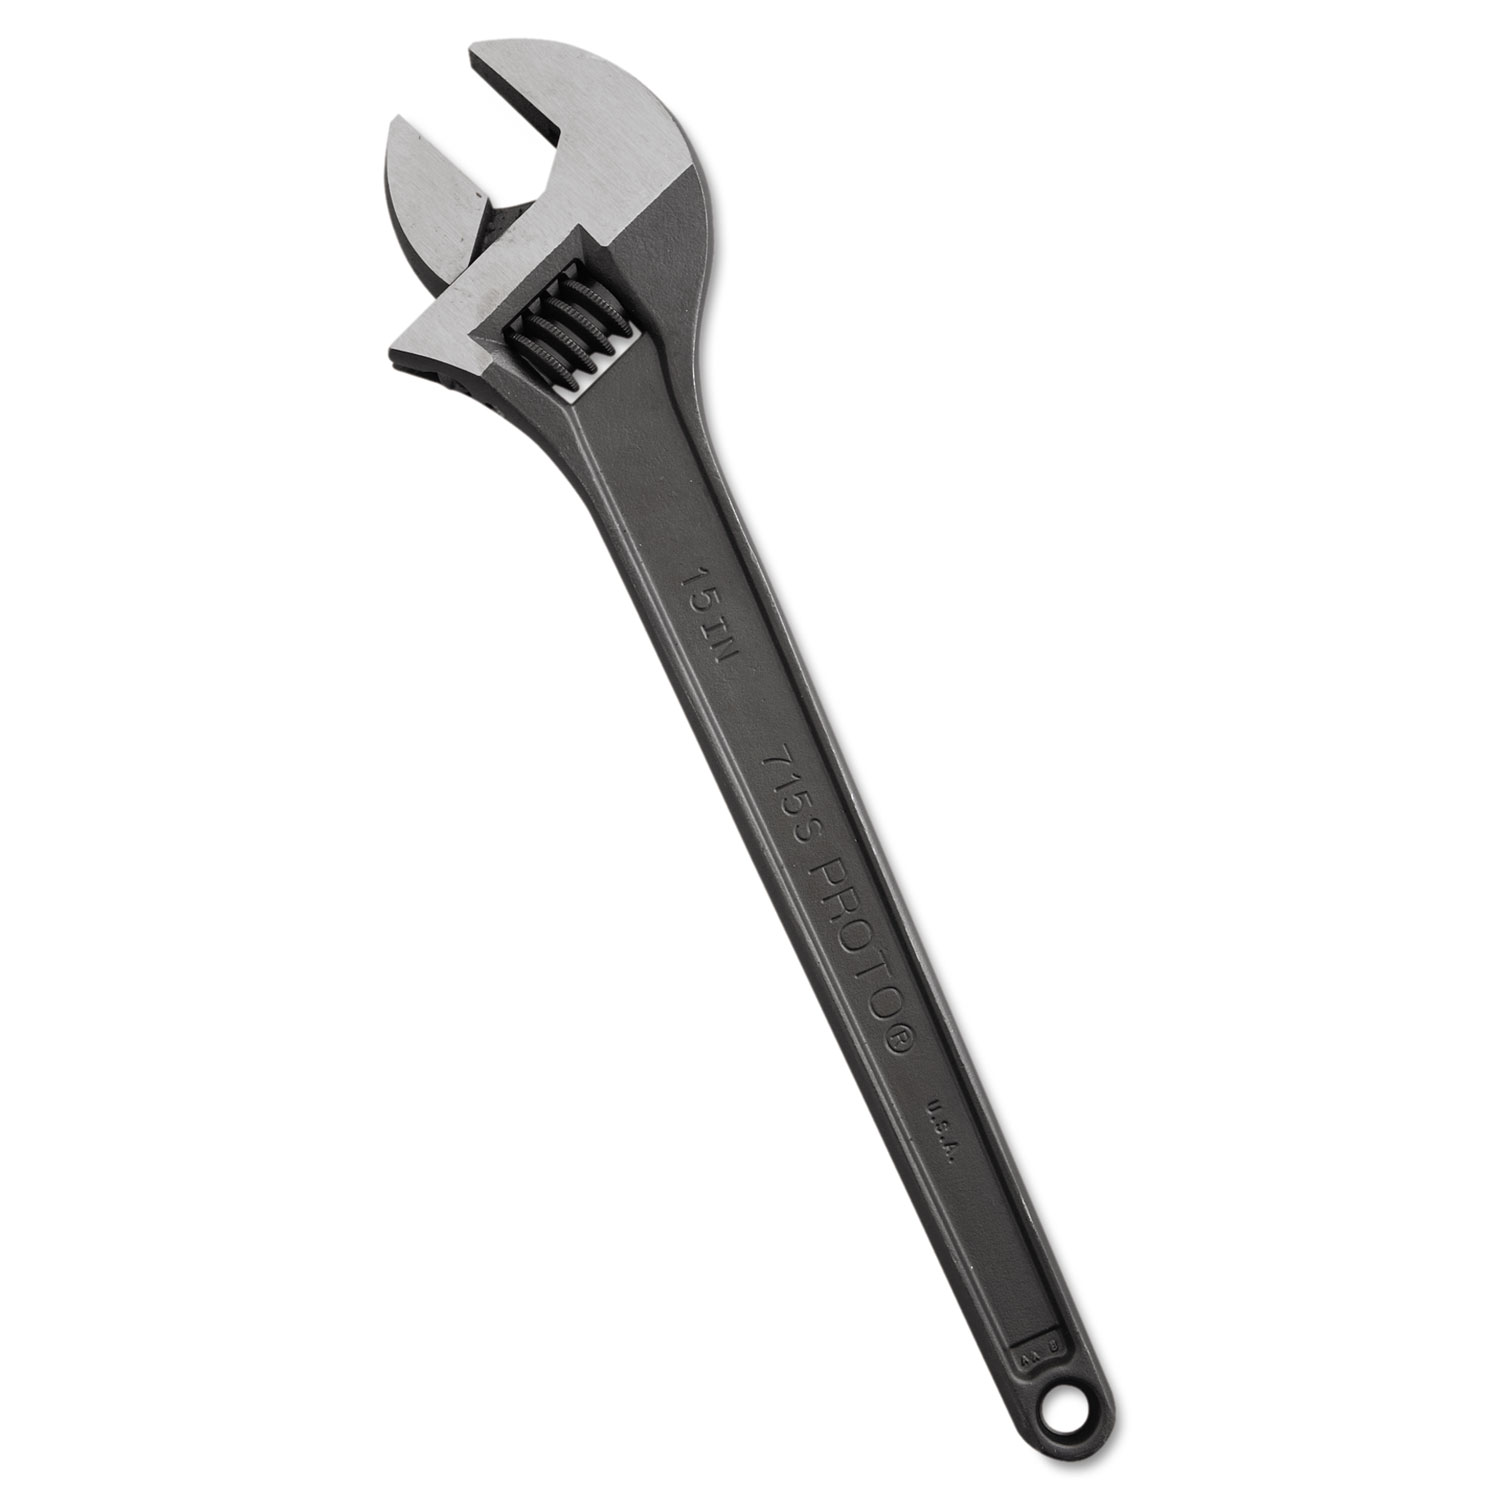 PROTO Adjustable Wrench, 15 Long, 1 11/16 Opening, Black